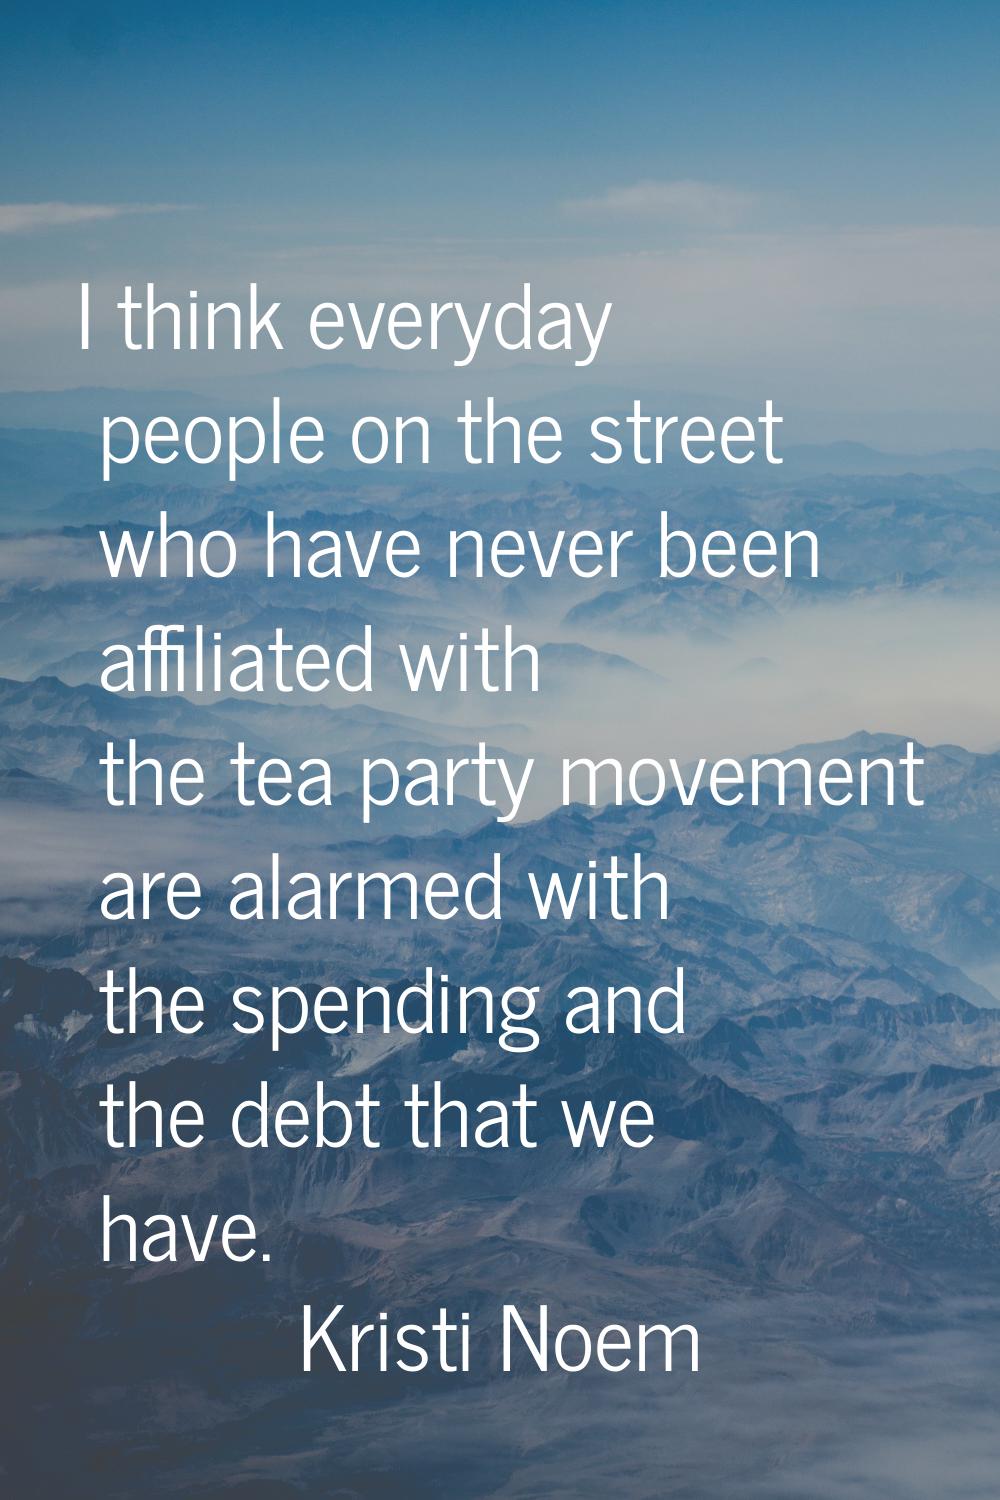 I think everyday people on the street who have never been affiliated with the tea party movement ar